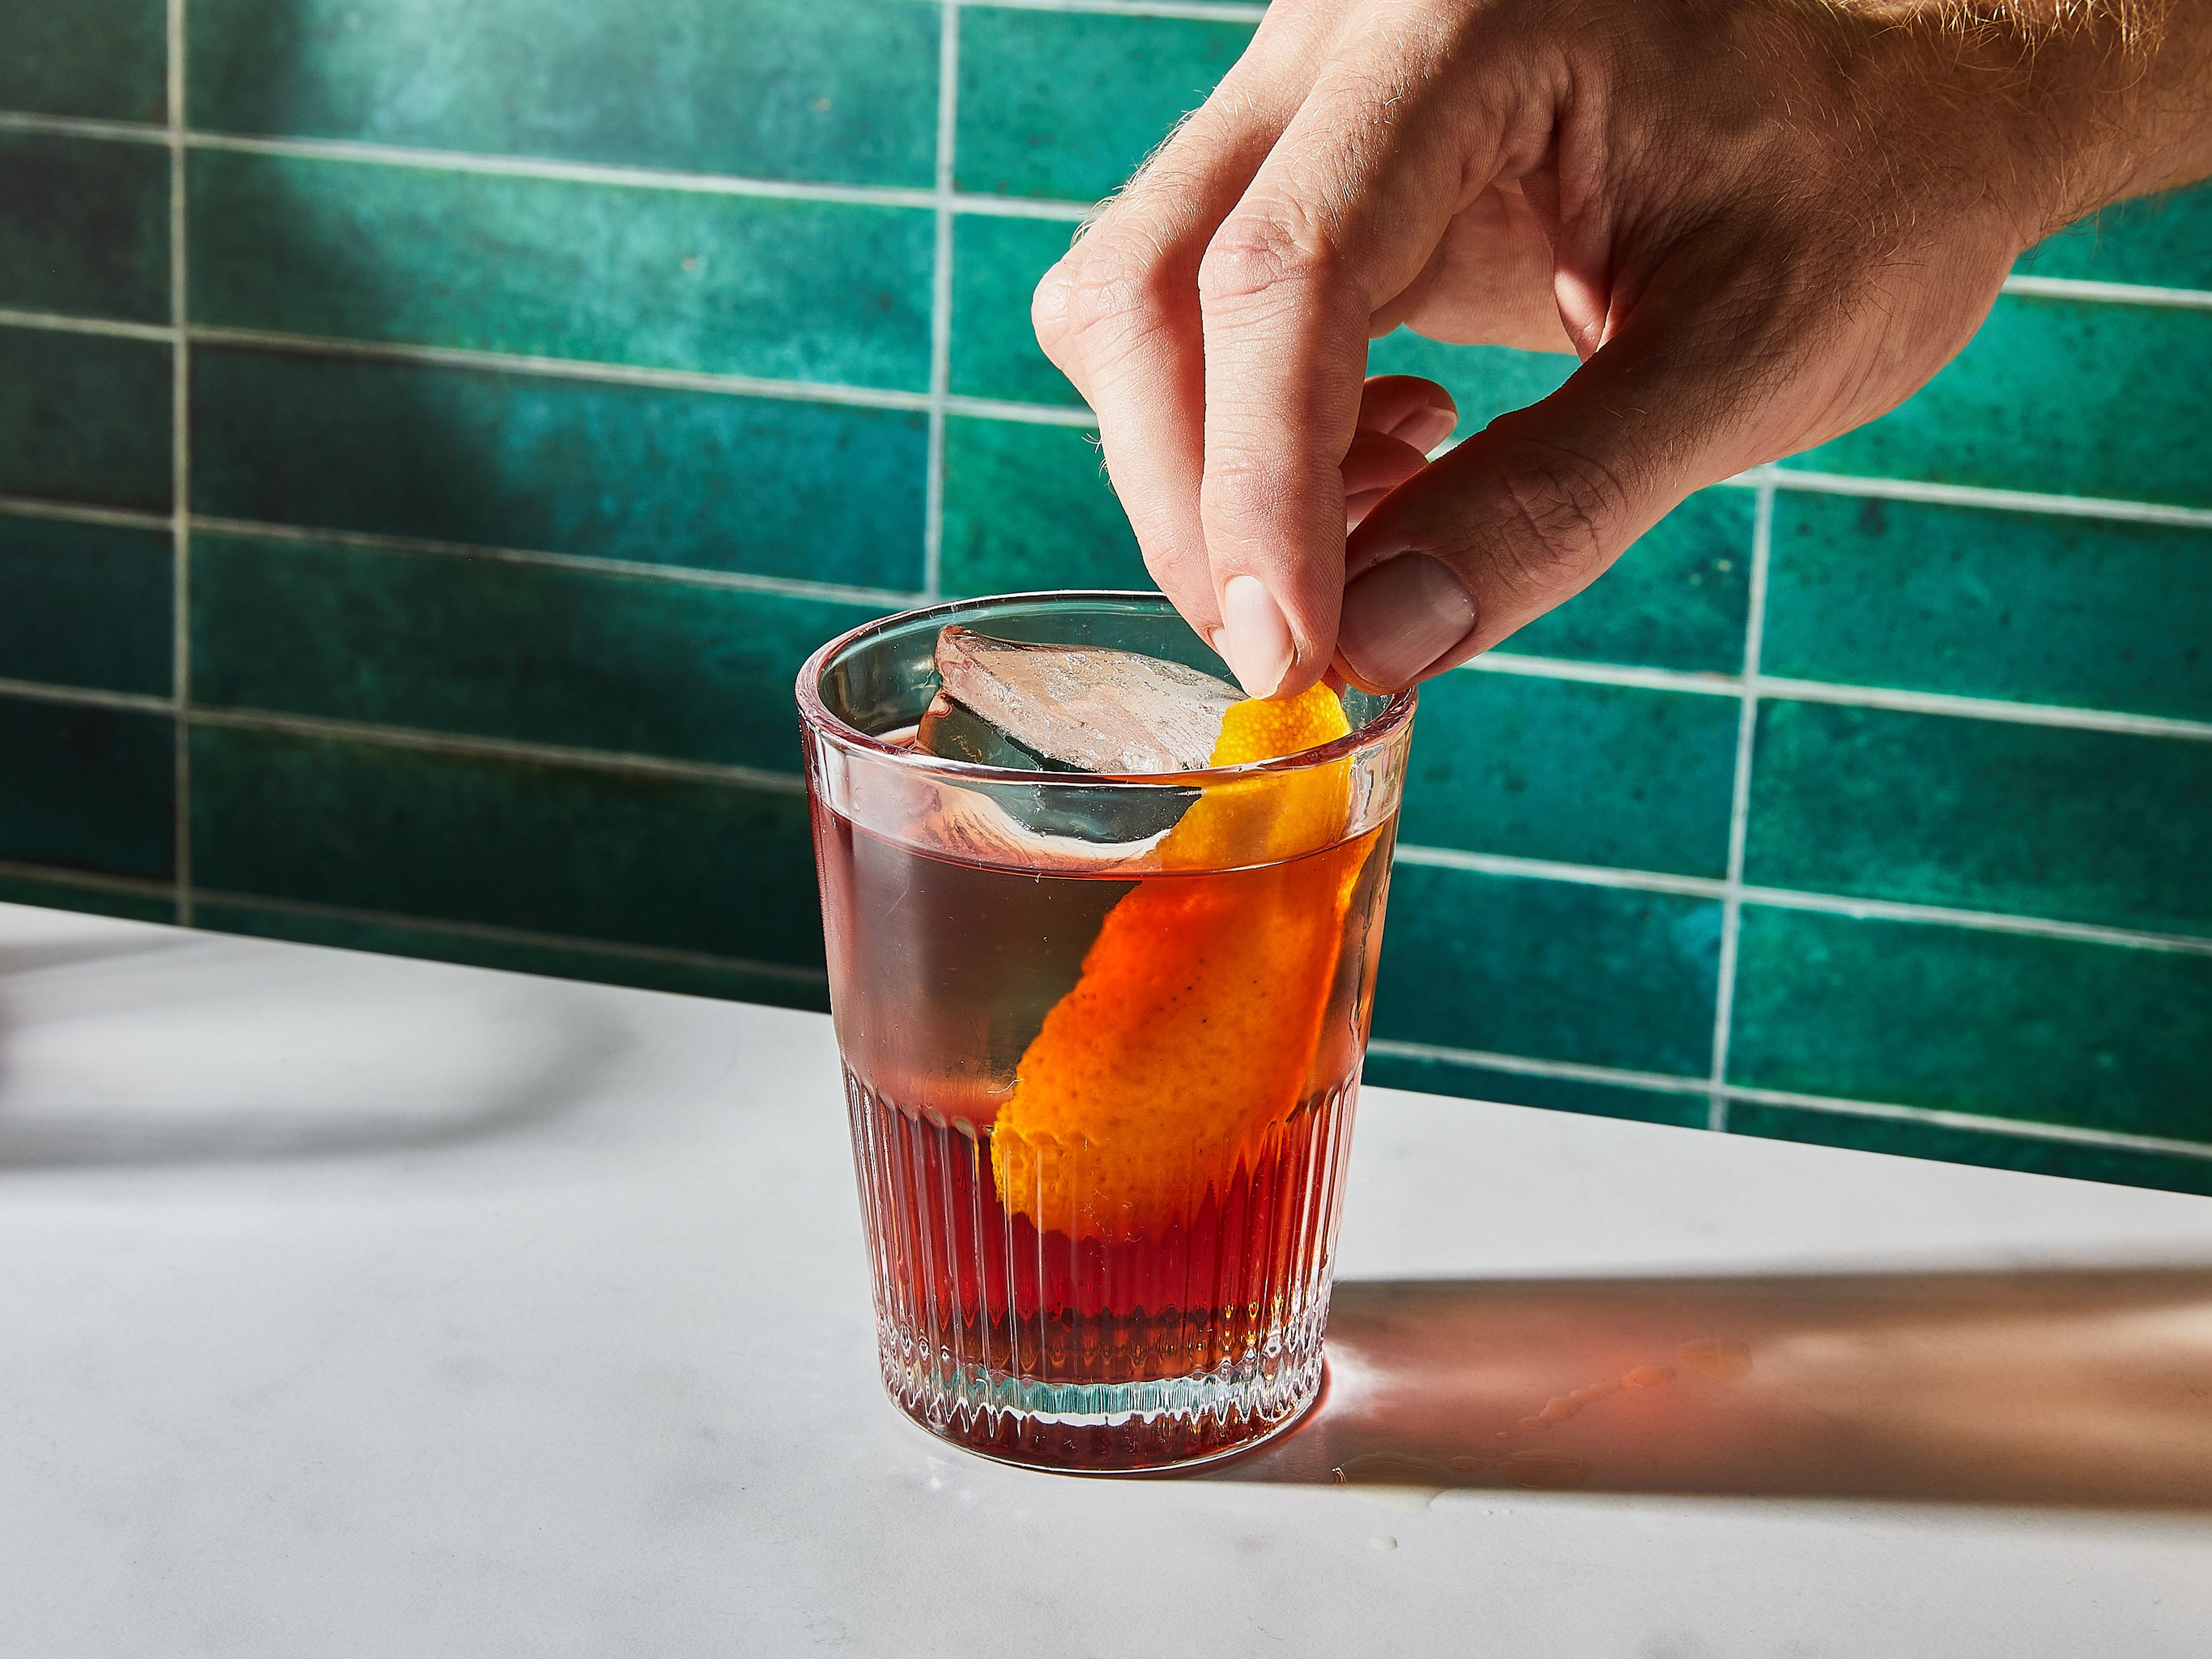 Cut a strip of orange peel, rub it around the rim of the glass, and then garnish your drink with it.